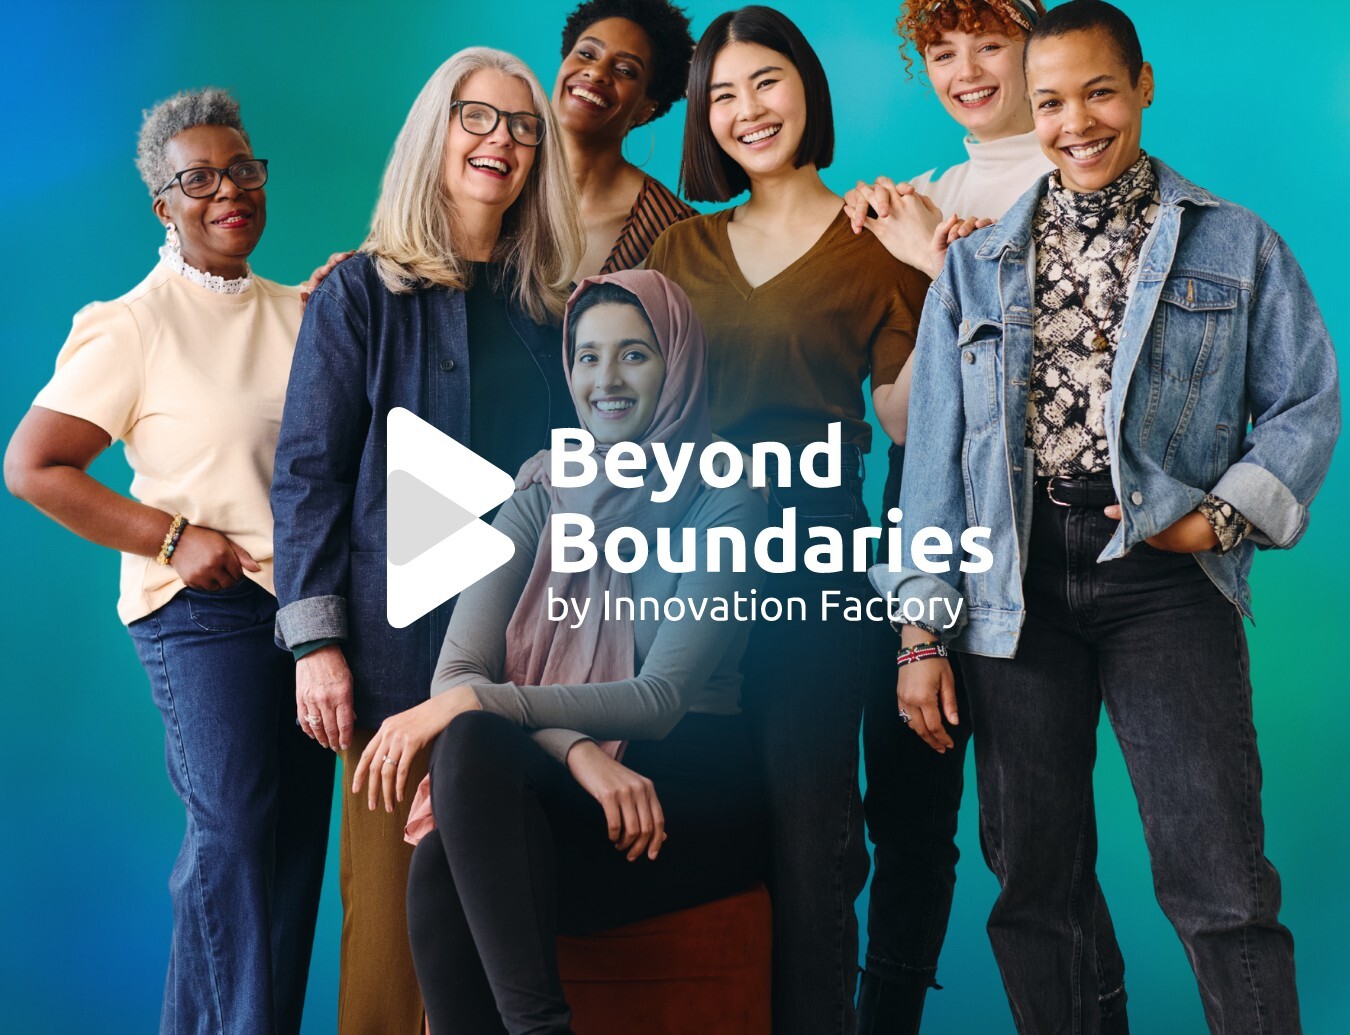 Beyond Boundaries, a 5-week hybrid training program that supports women entrepreneurs to grow and scale their businesses.